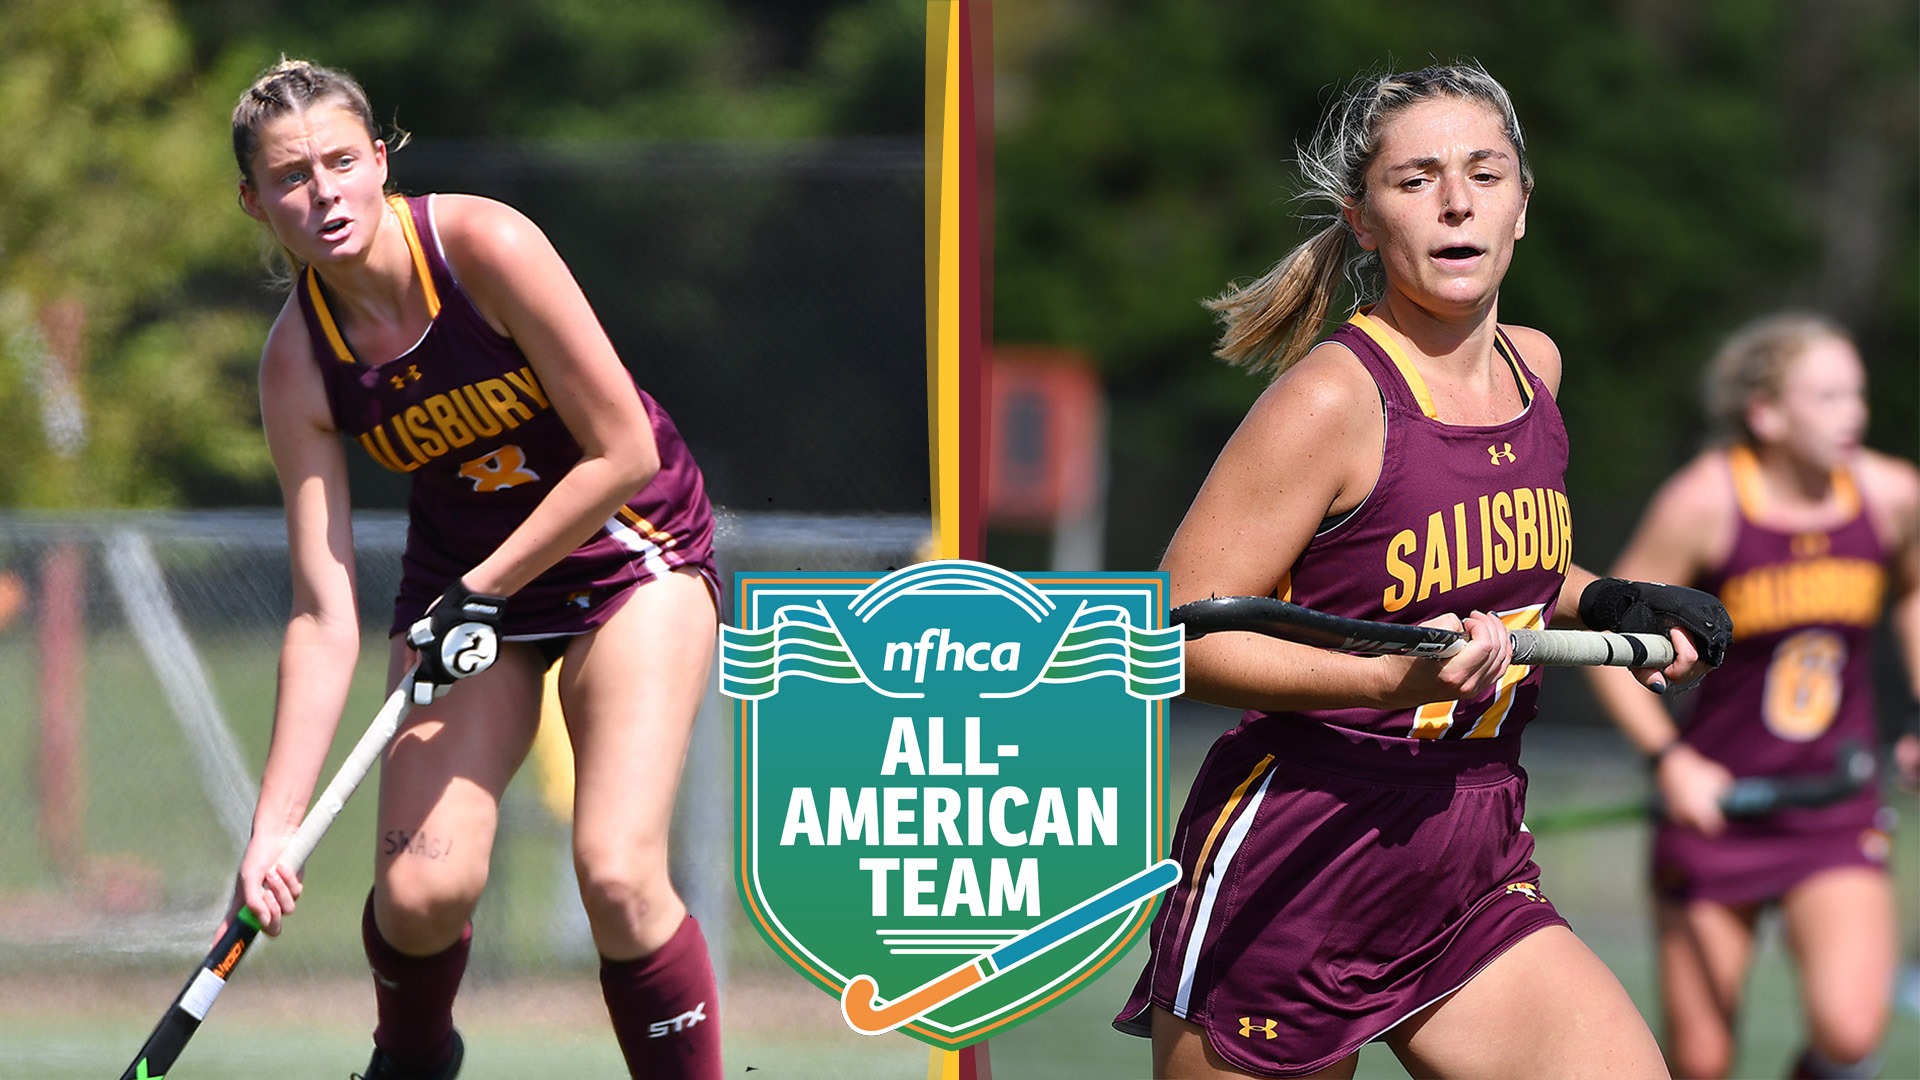 Salisbury's Dinopoulos and McDorman named NFHCA All-Americans